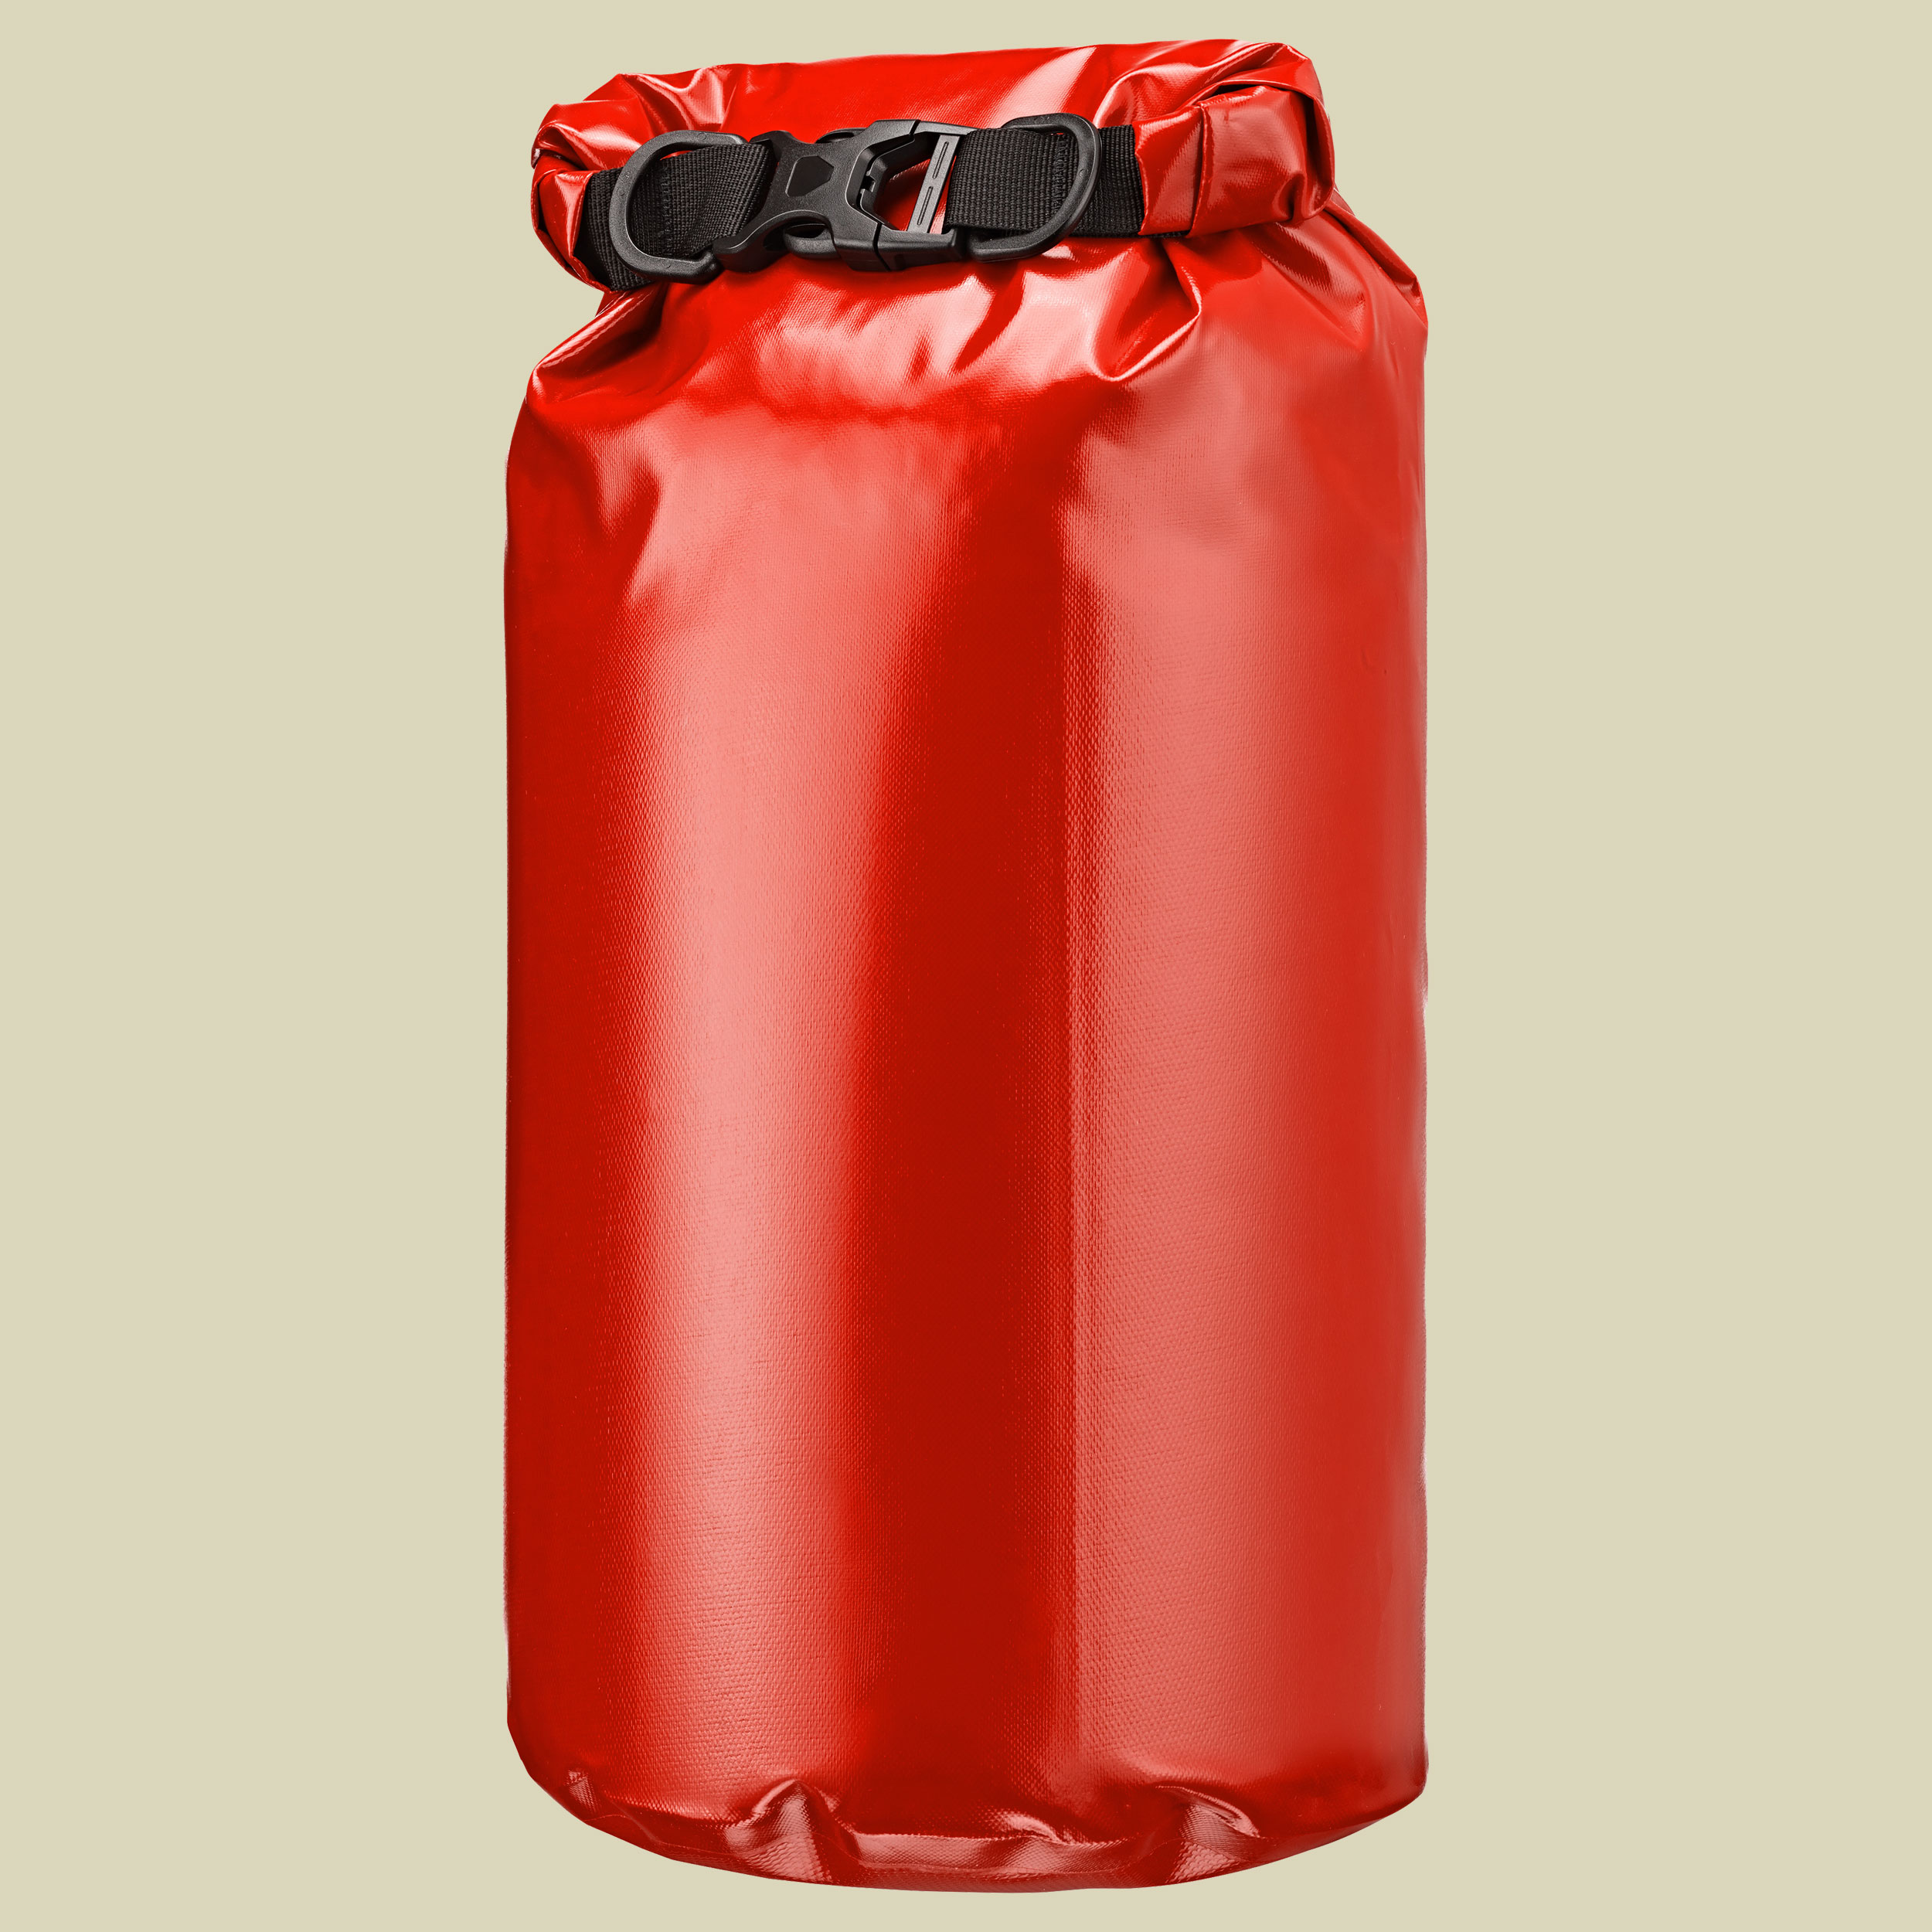 Dry-Bag PD 350 Volumen in Liter 10 Farbe cranberry-signalrot